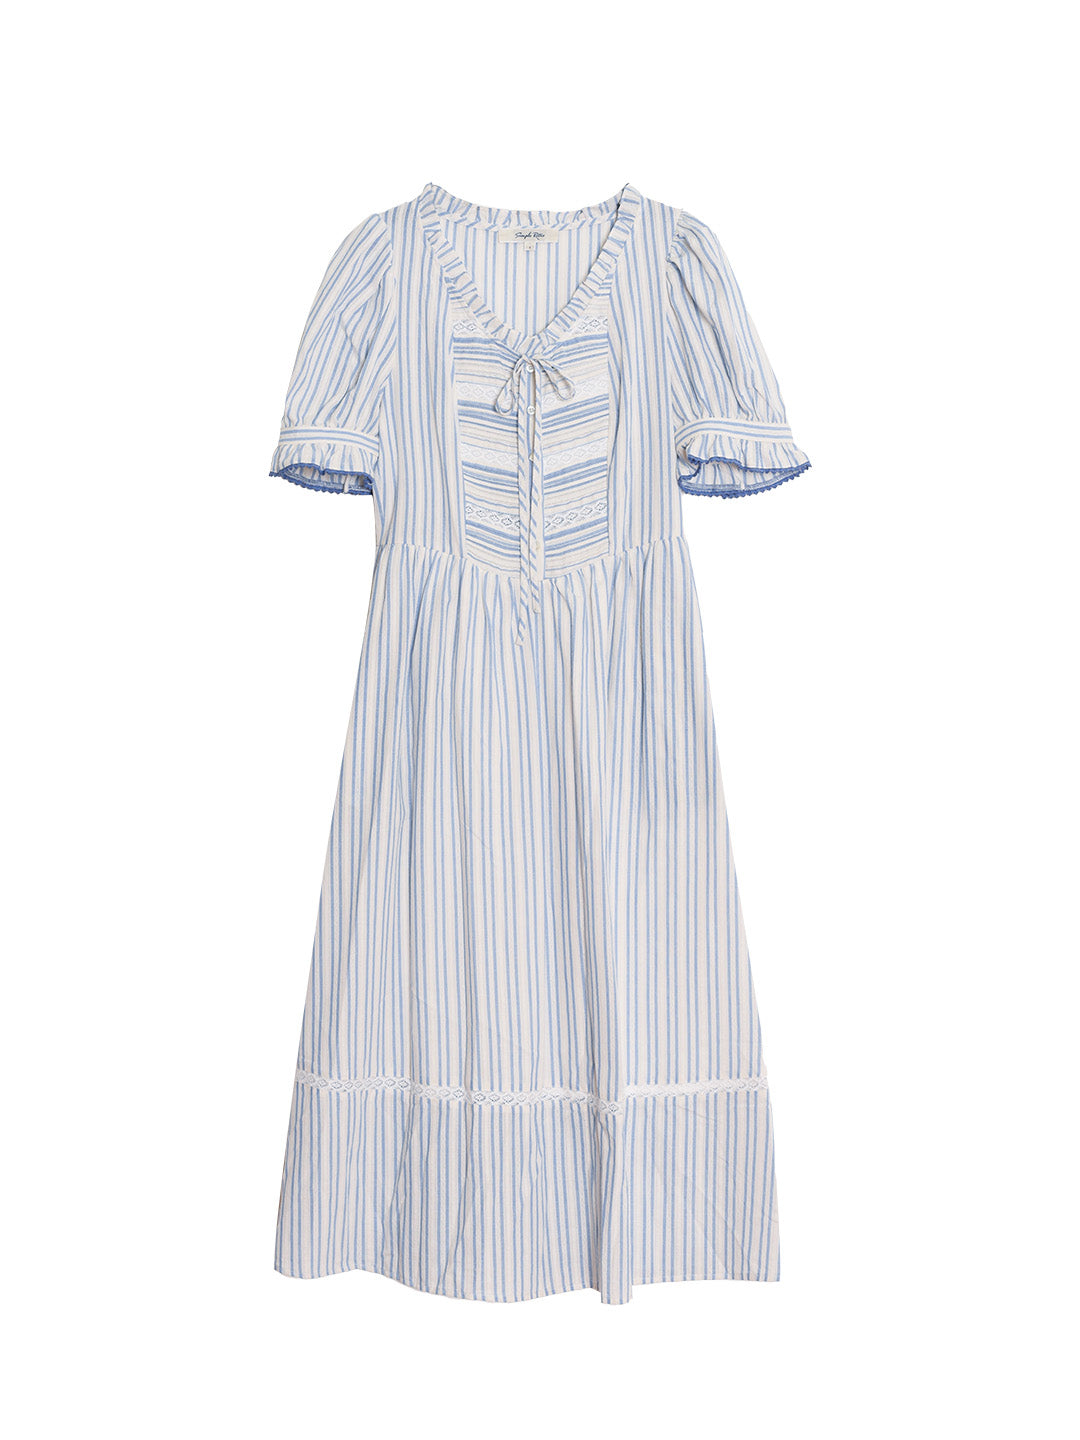 Raelyn Trim Bow Round Neck Puff Sleeve Lace Striped Cotton Dress